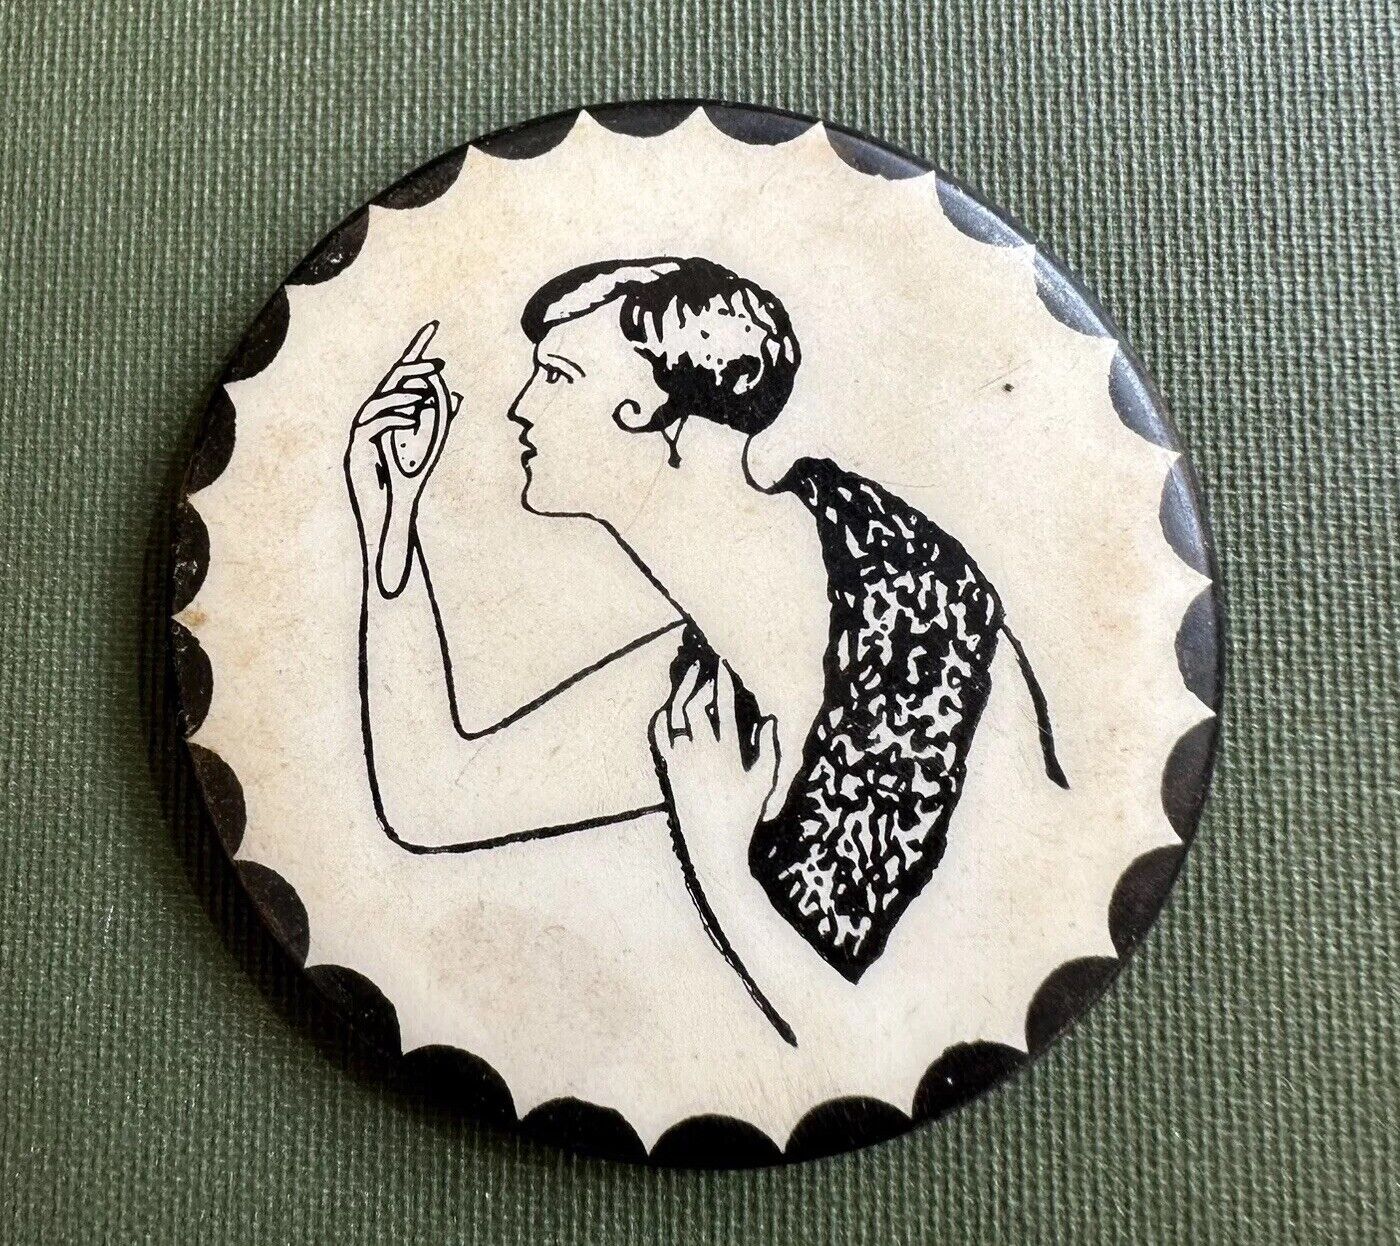 Antique 1920s naughty risqué Flapper lady celluloid pocket novelty mirror  As is